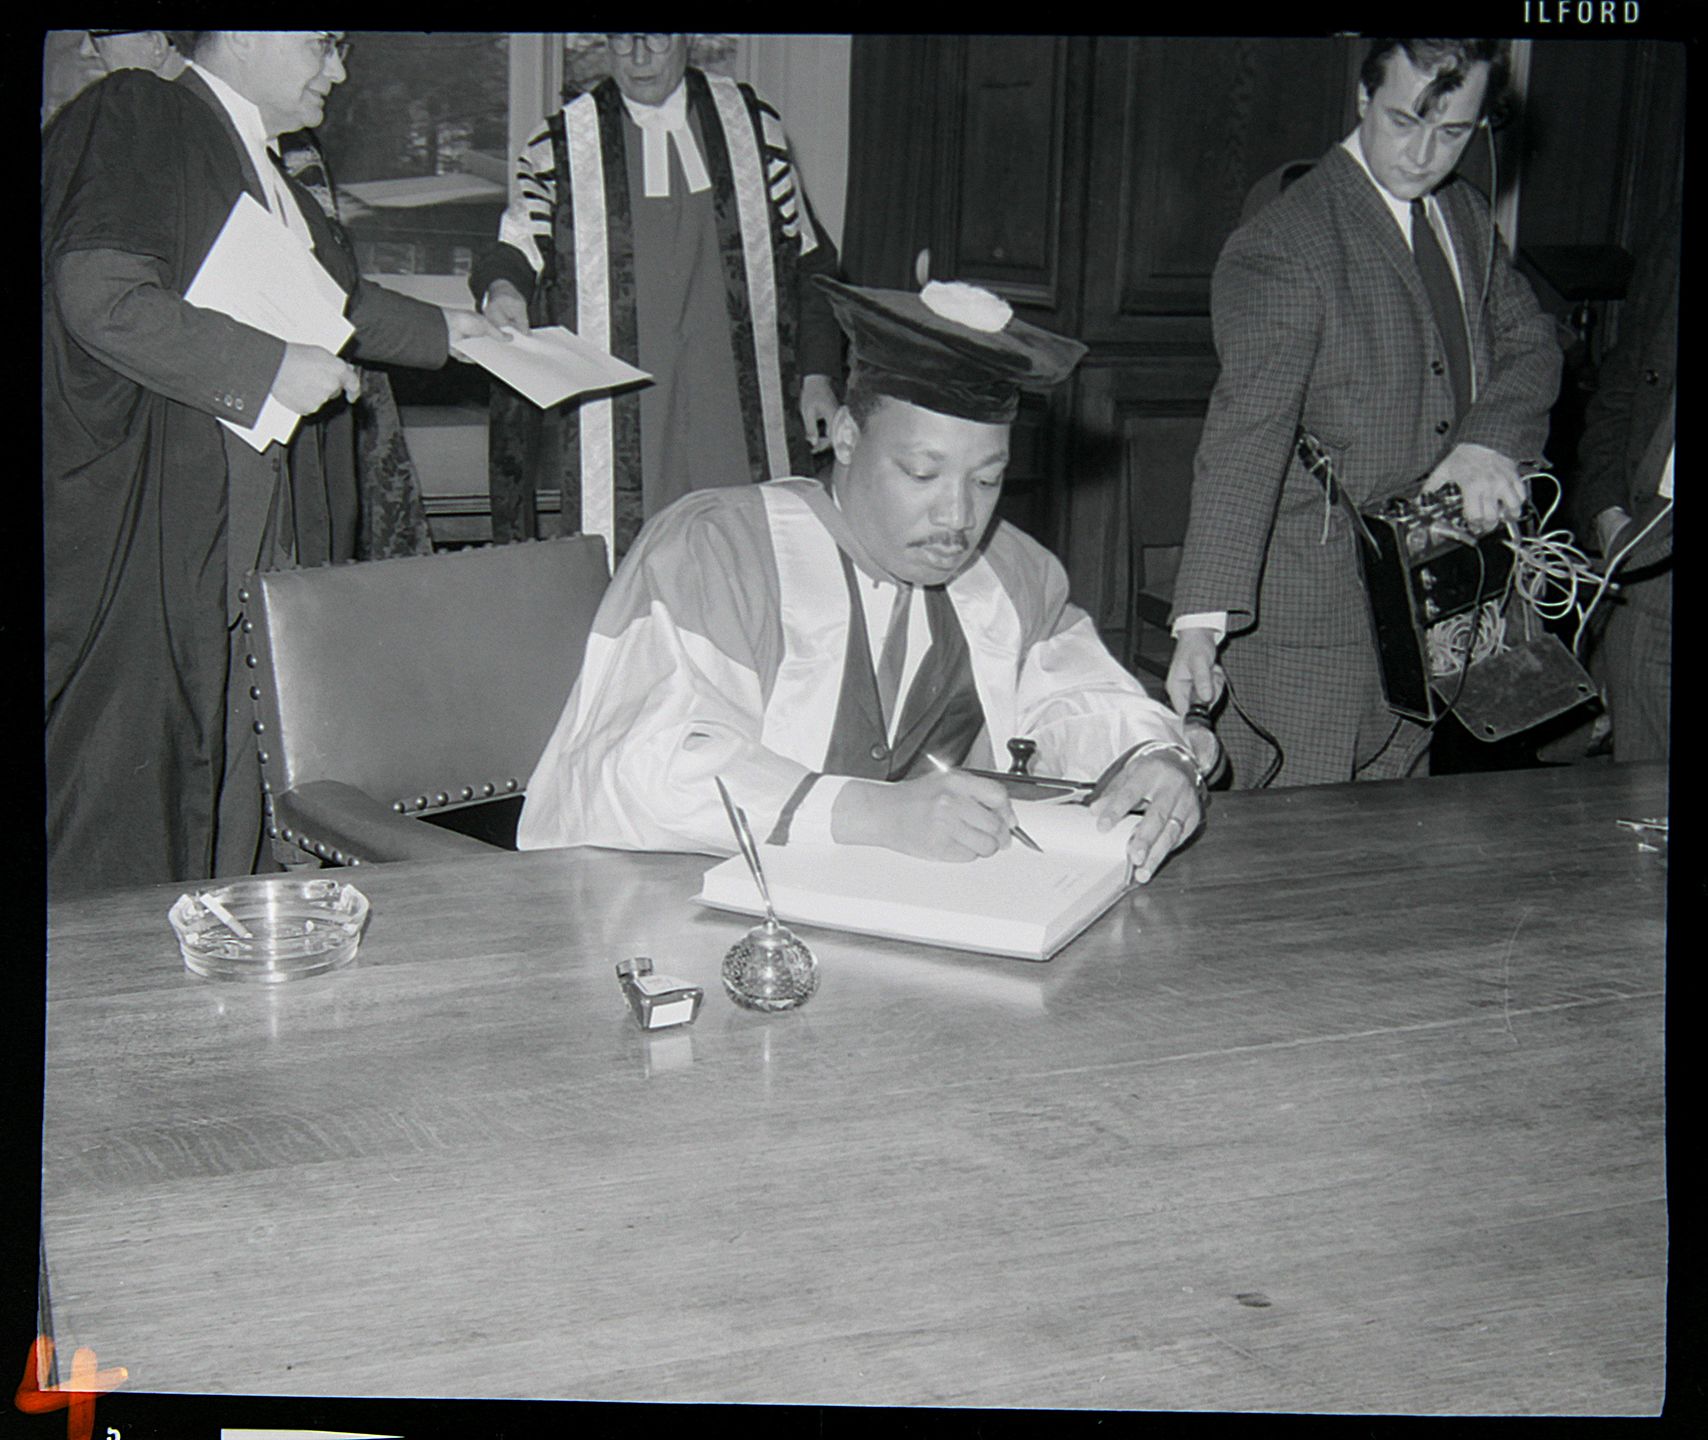 Martin Luther King signing the University's visitors' book 